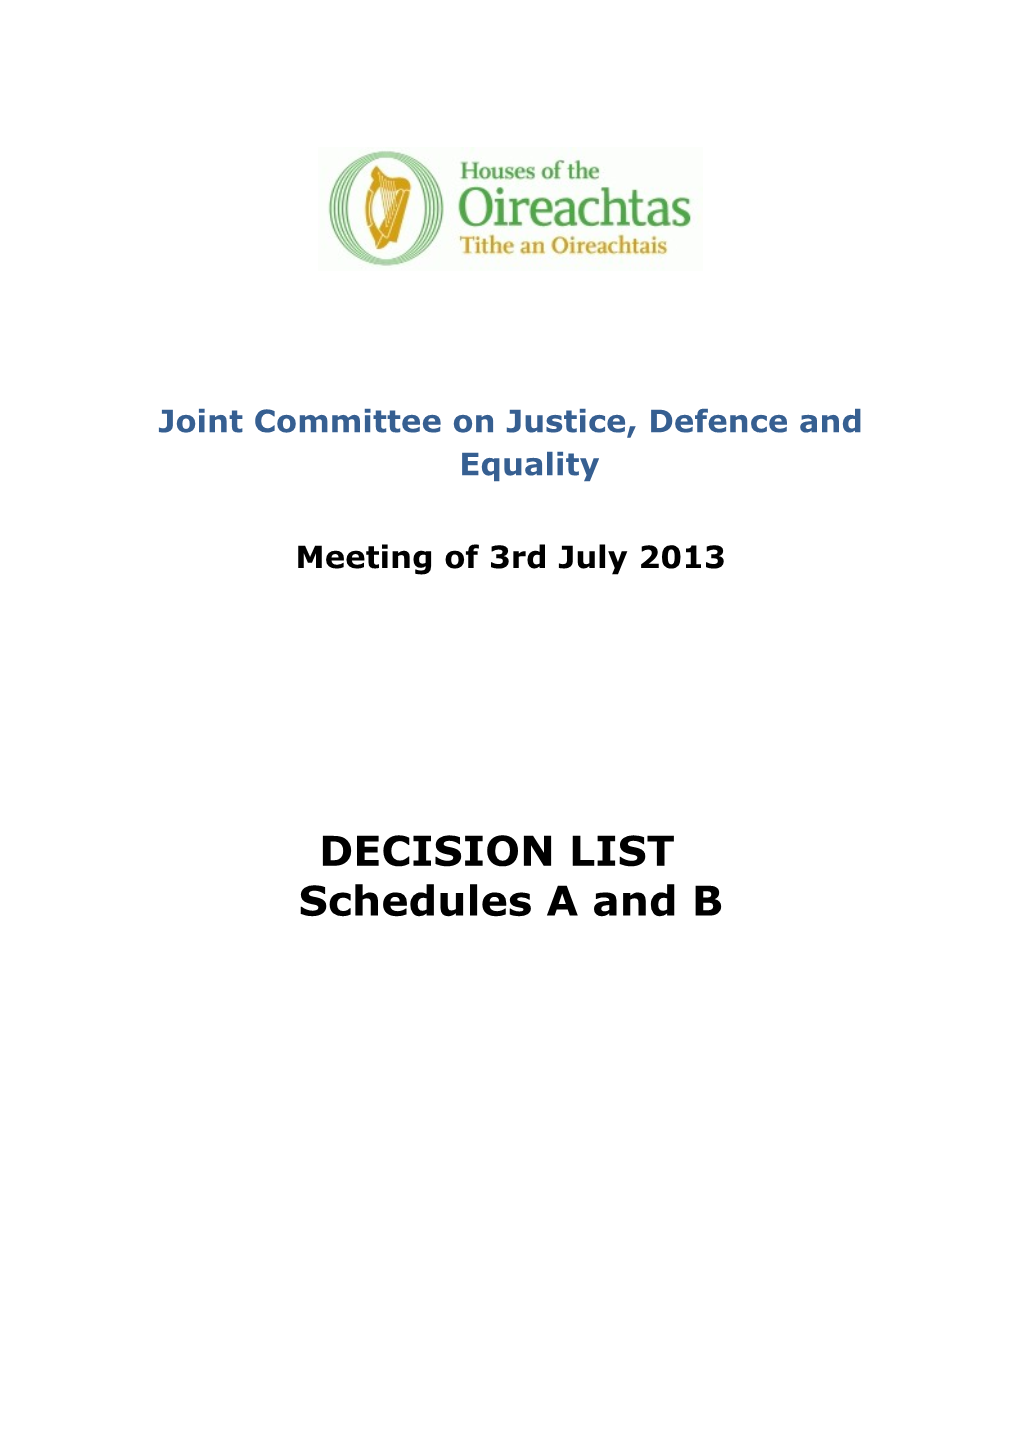 Joint Committee on Justice, Defence and Equality